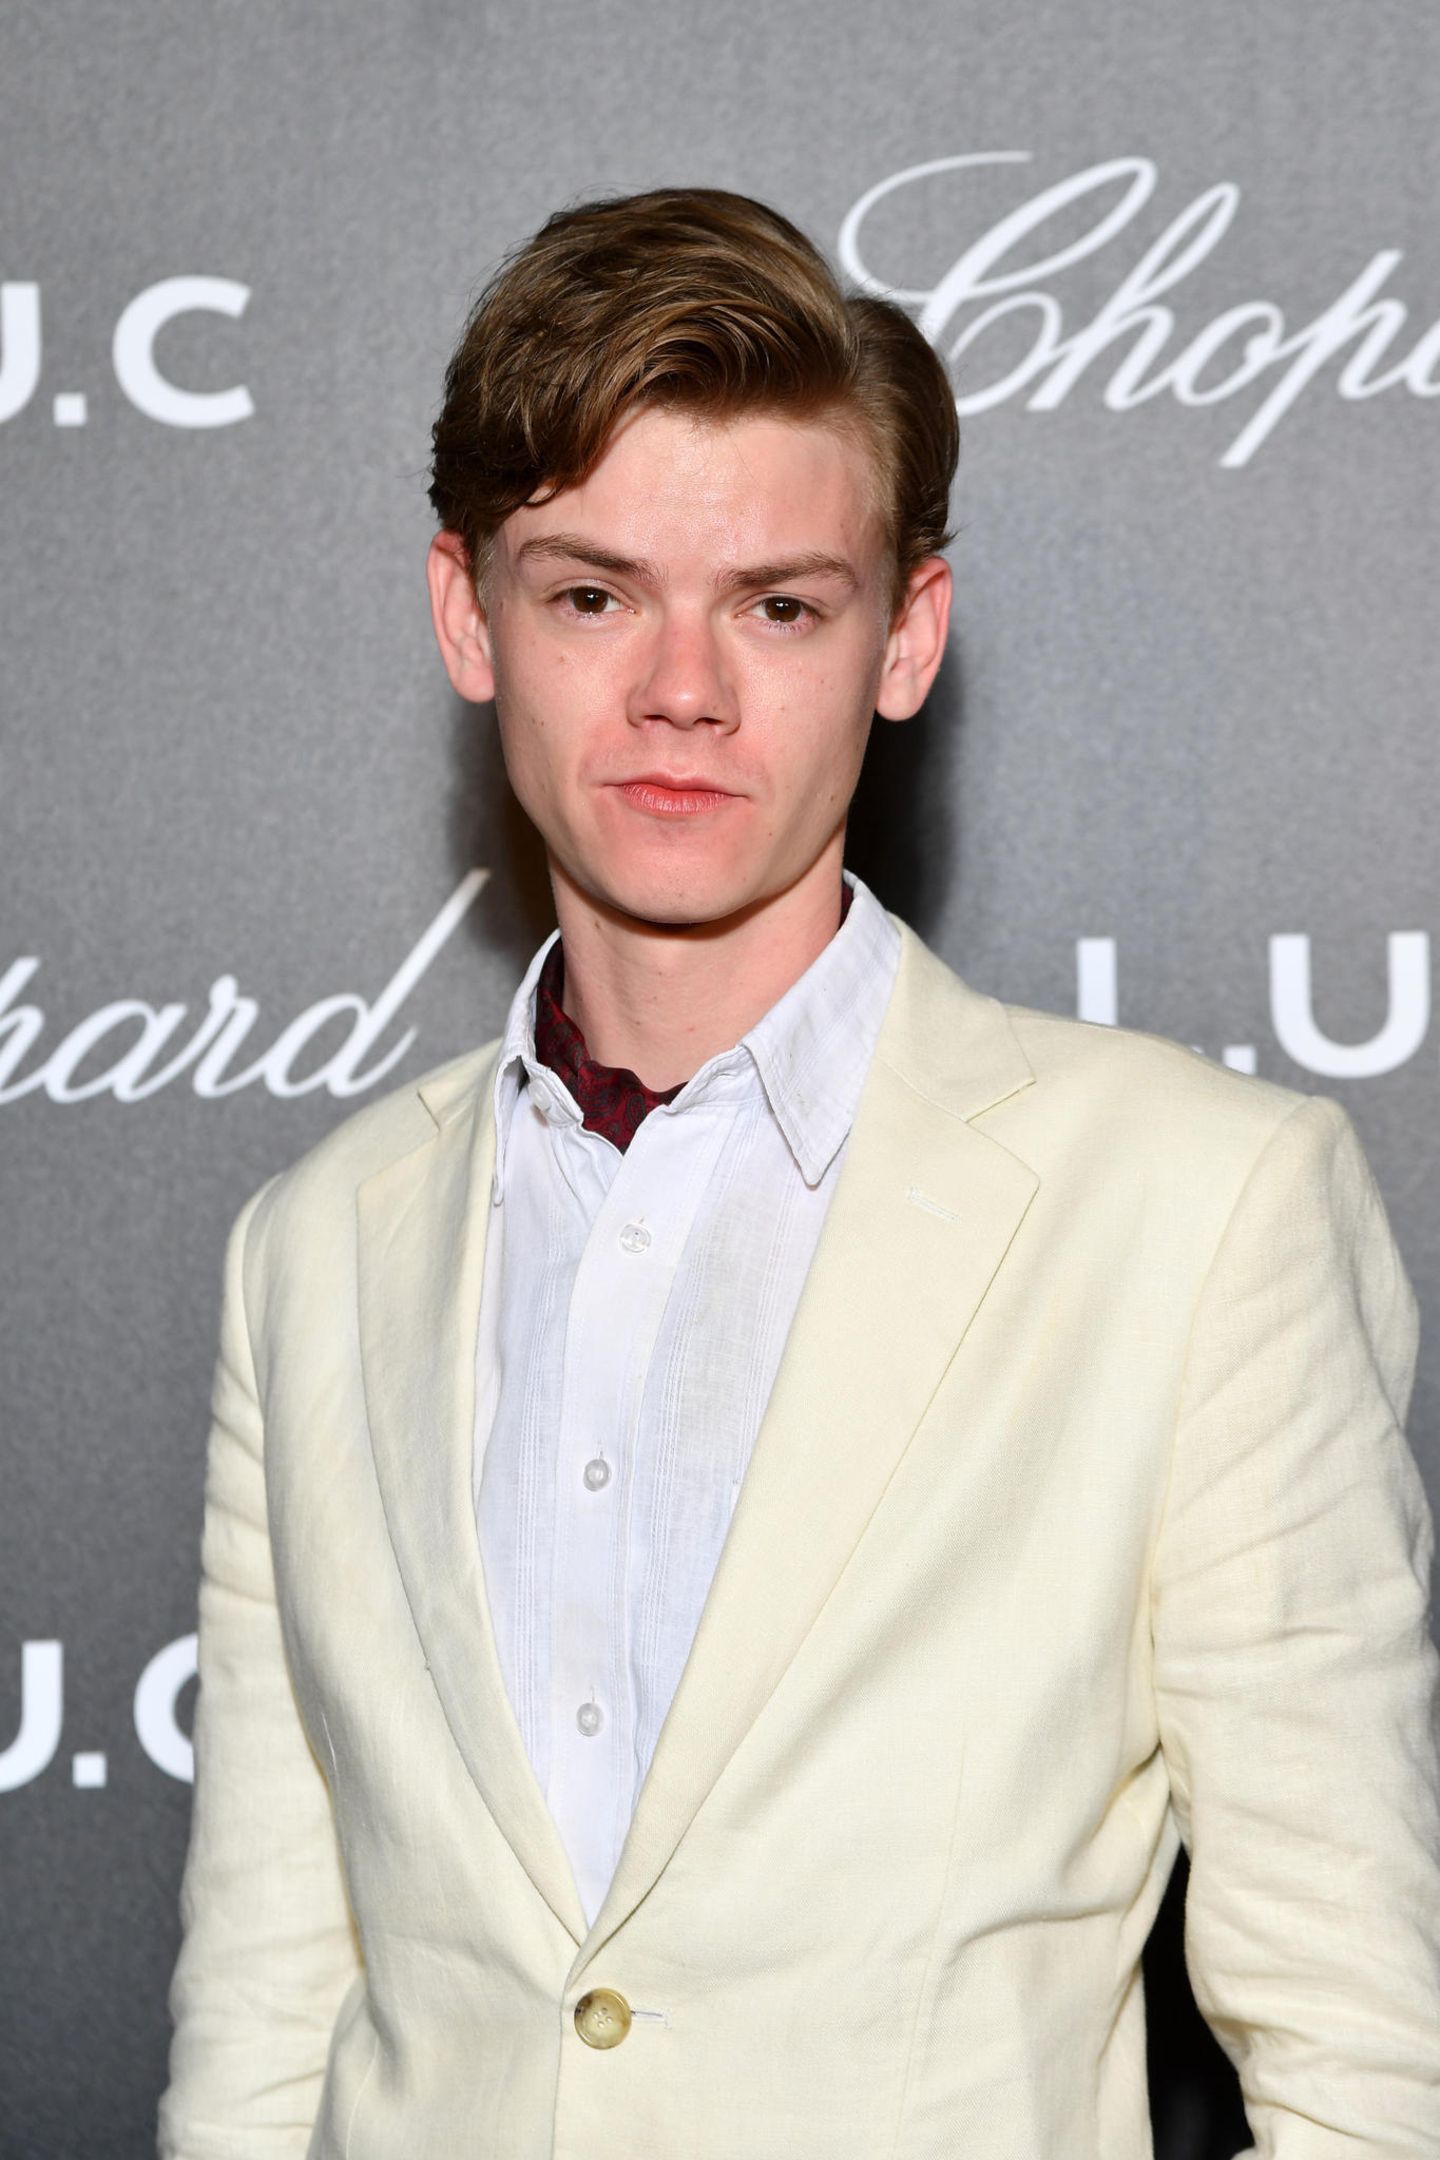 Famous Family: Thomas Brodie Sangster